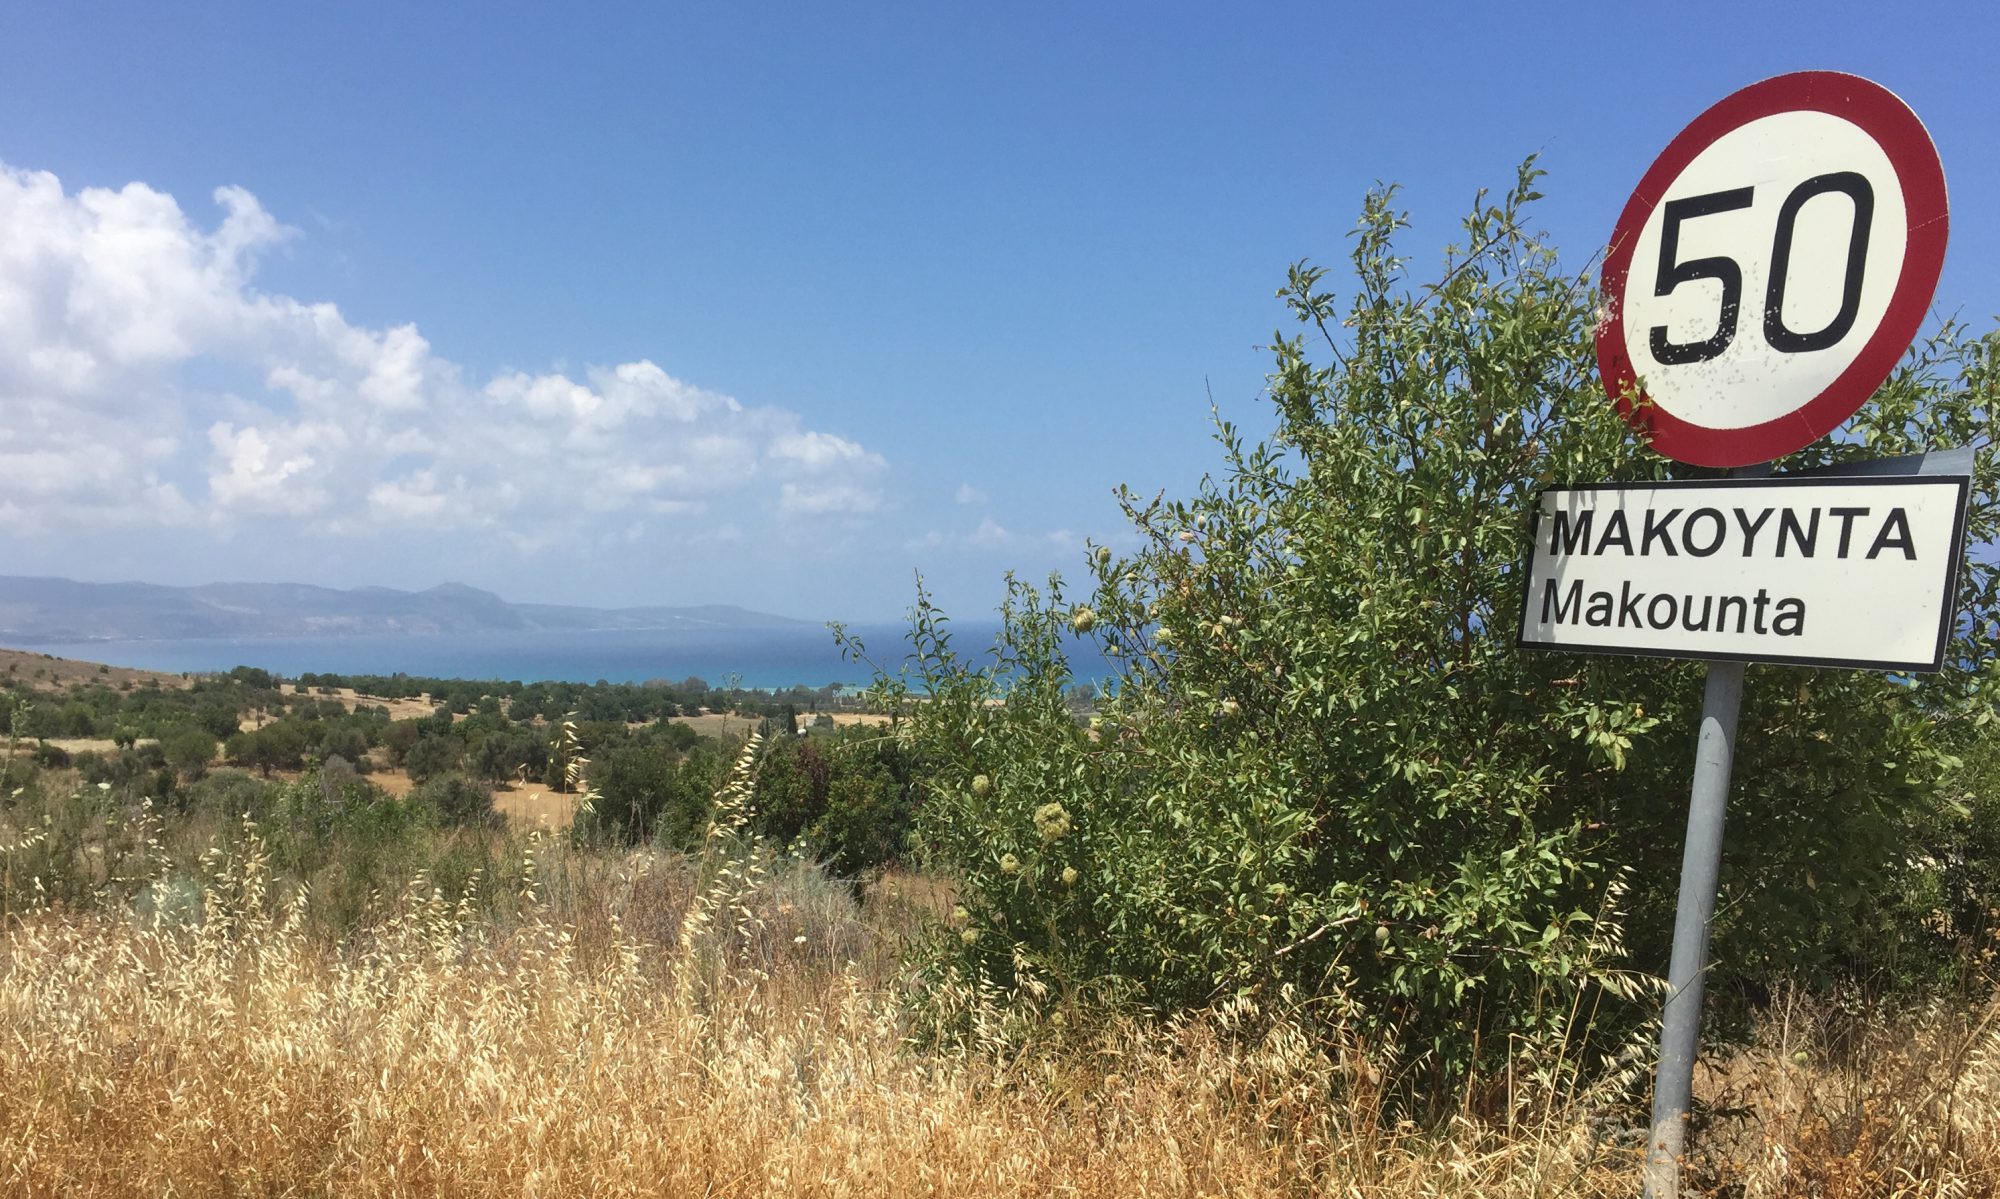 Landscape in Cyprus with a 50 km speed limit sign indicating Makounta